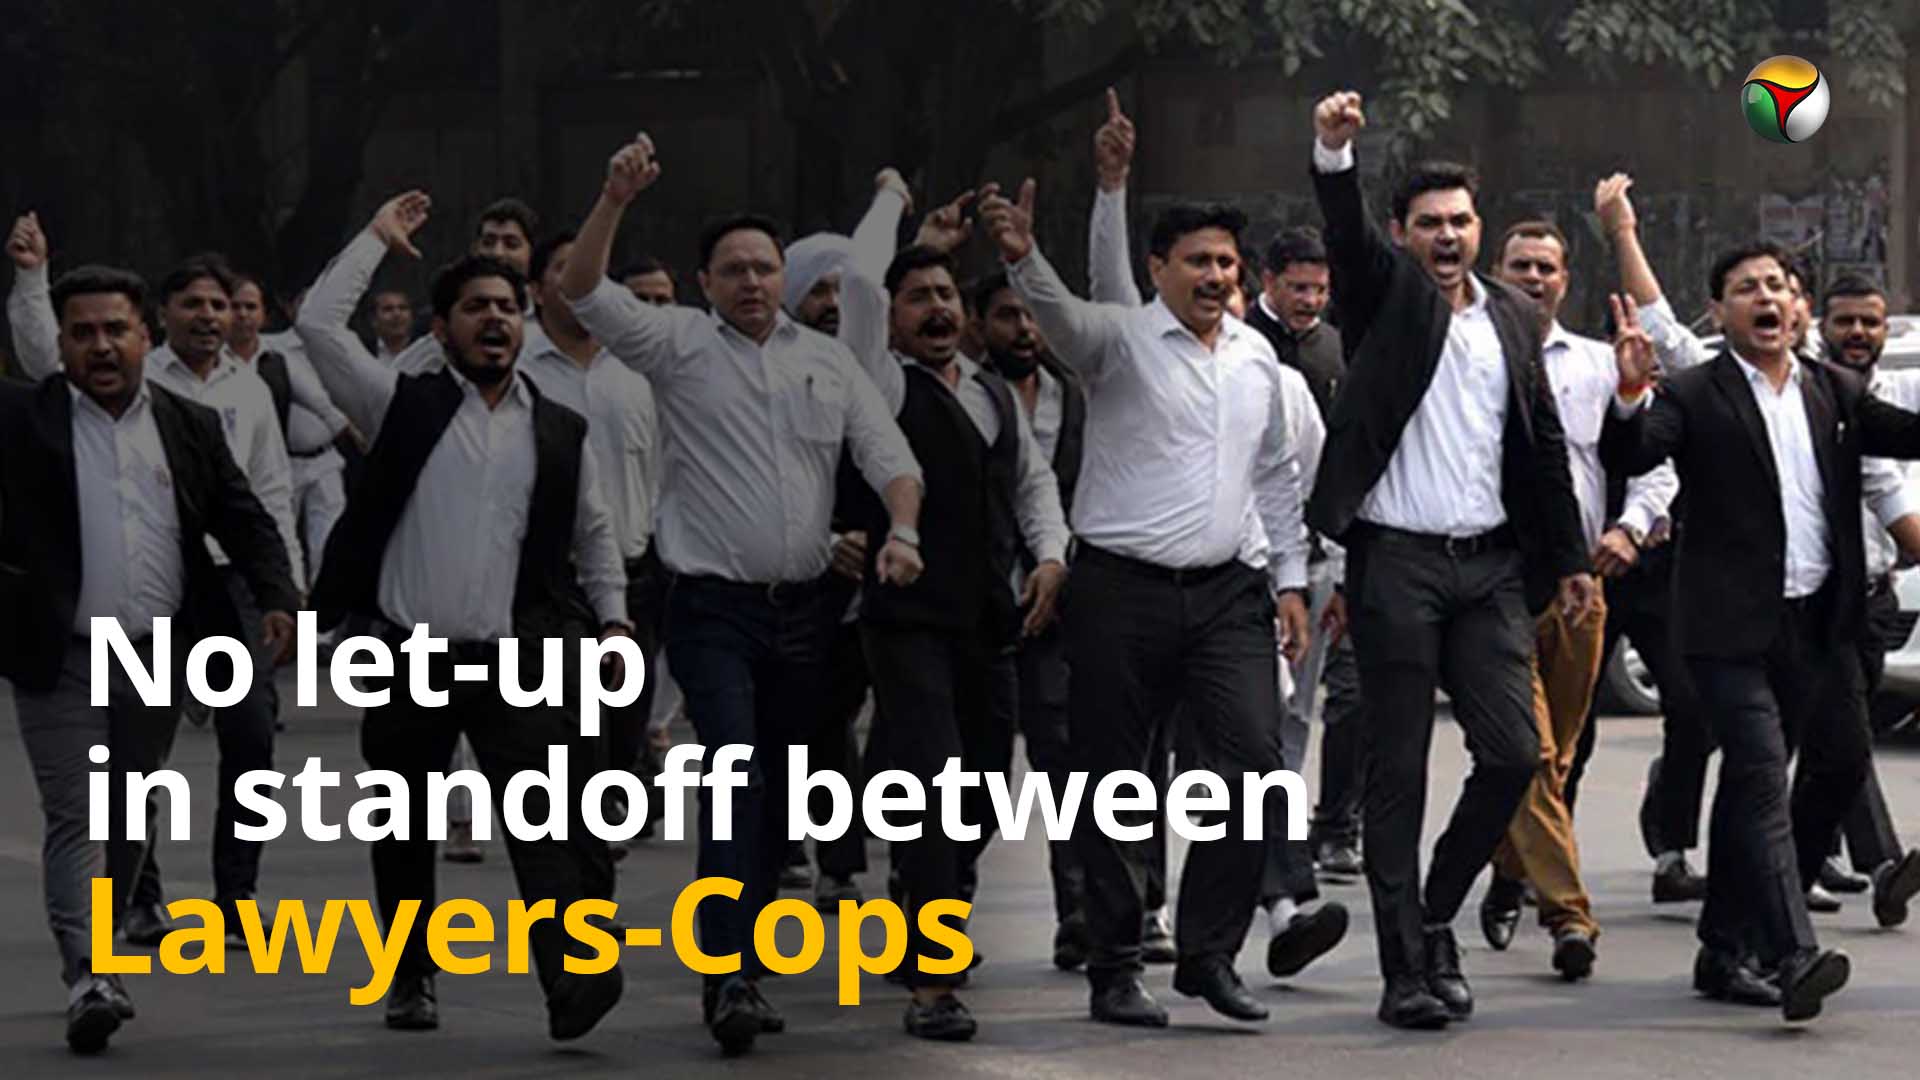 No let-up in standoff between lawyers-cops